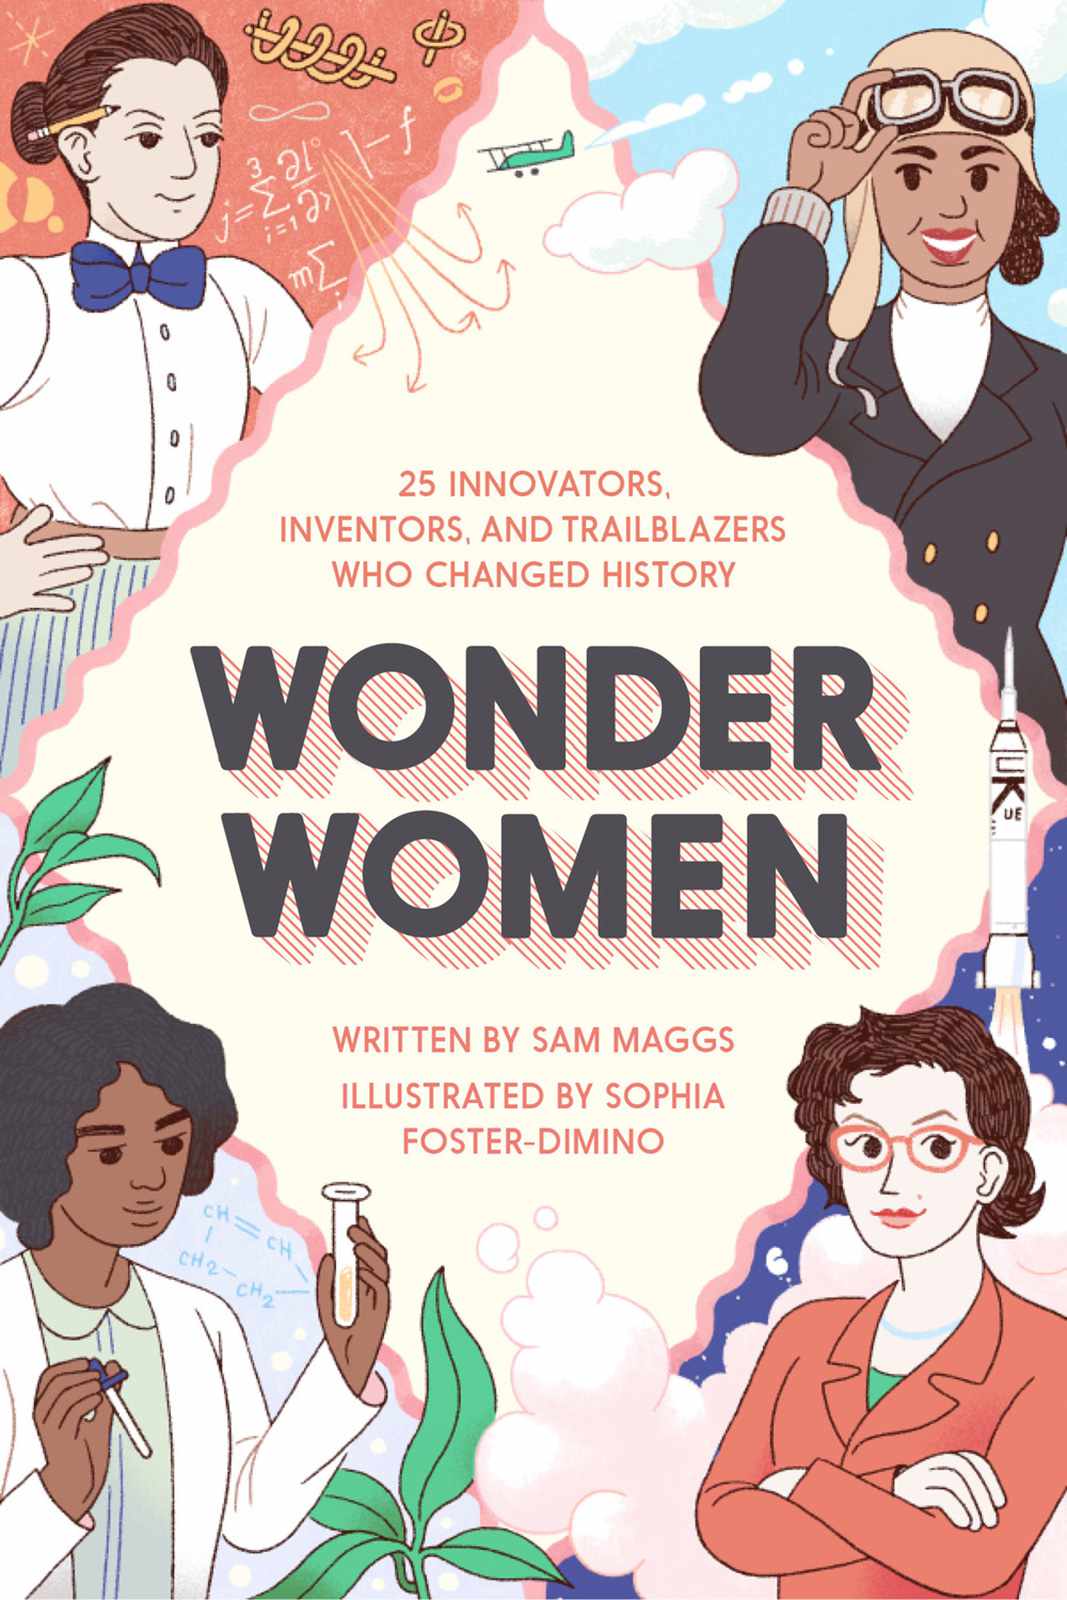 Wonder Women: 25 Innovators, Inventors, and Trailblazers Who Changed History&nbsp;by Sam Maggs&nbsp;